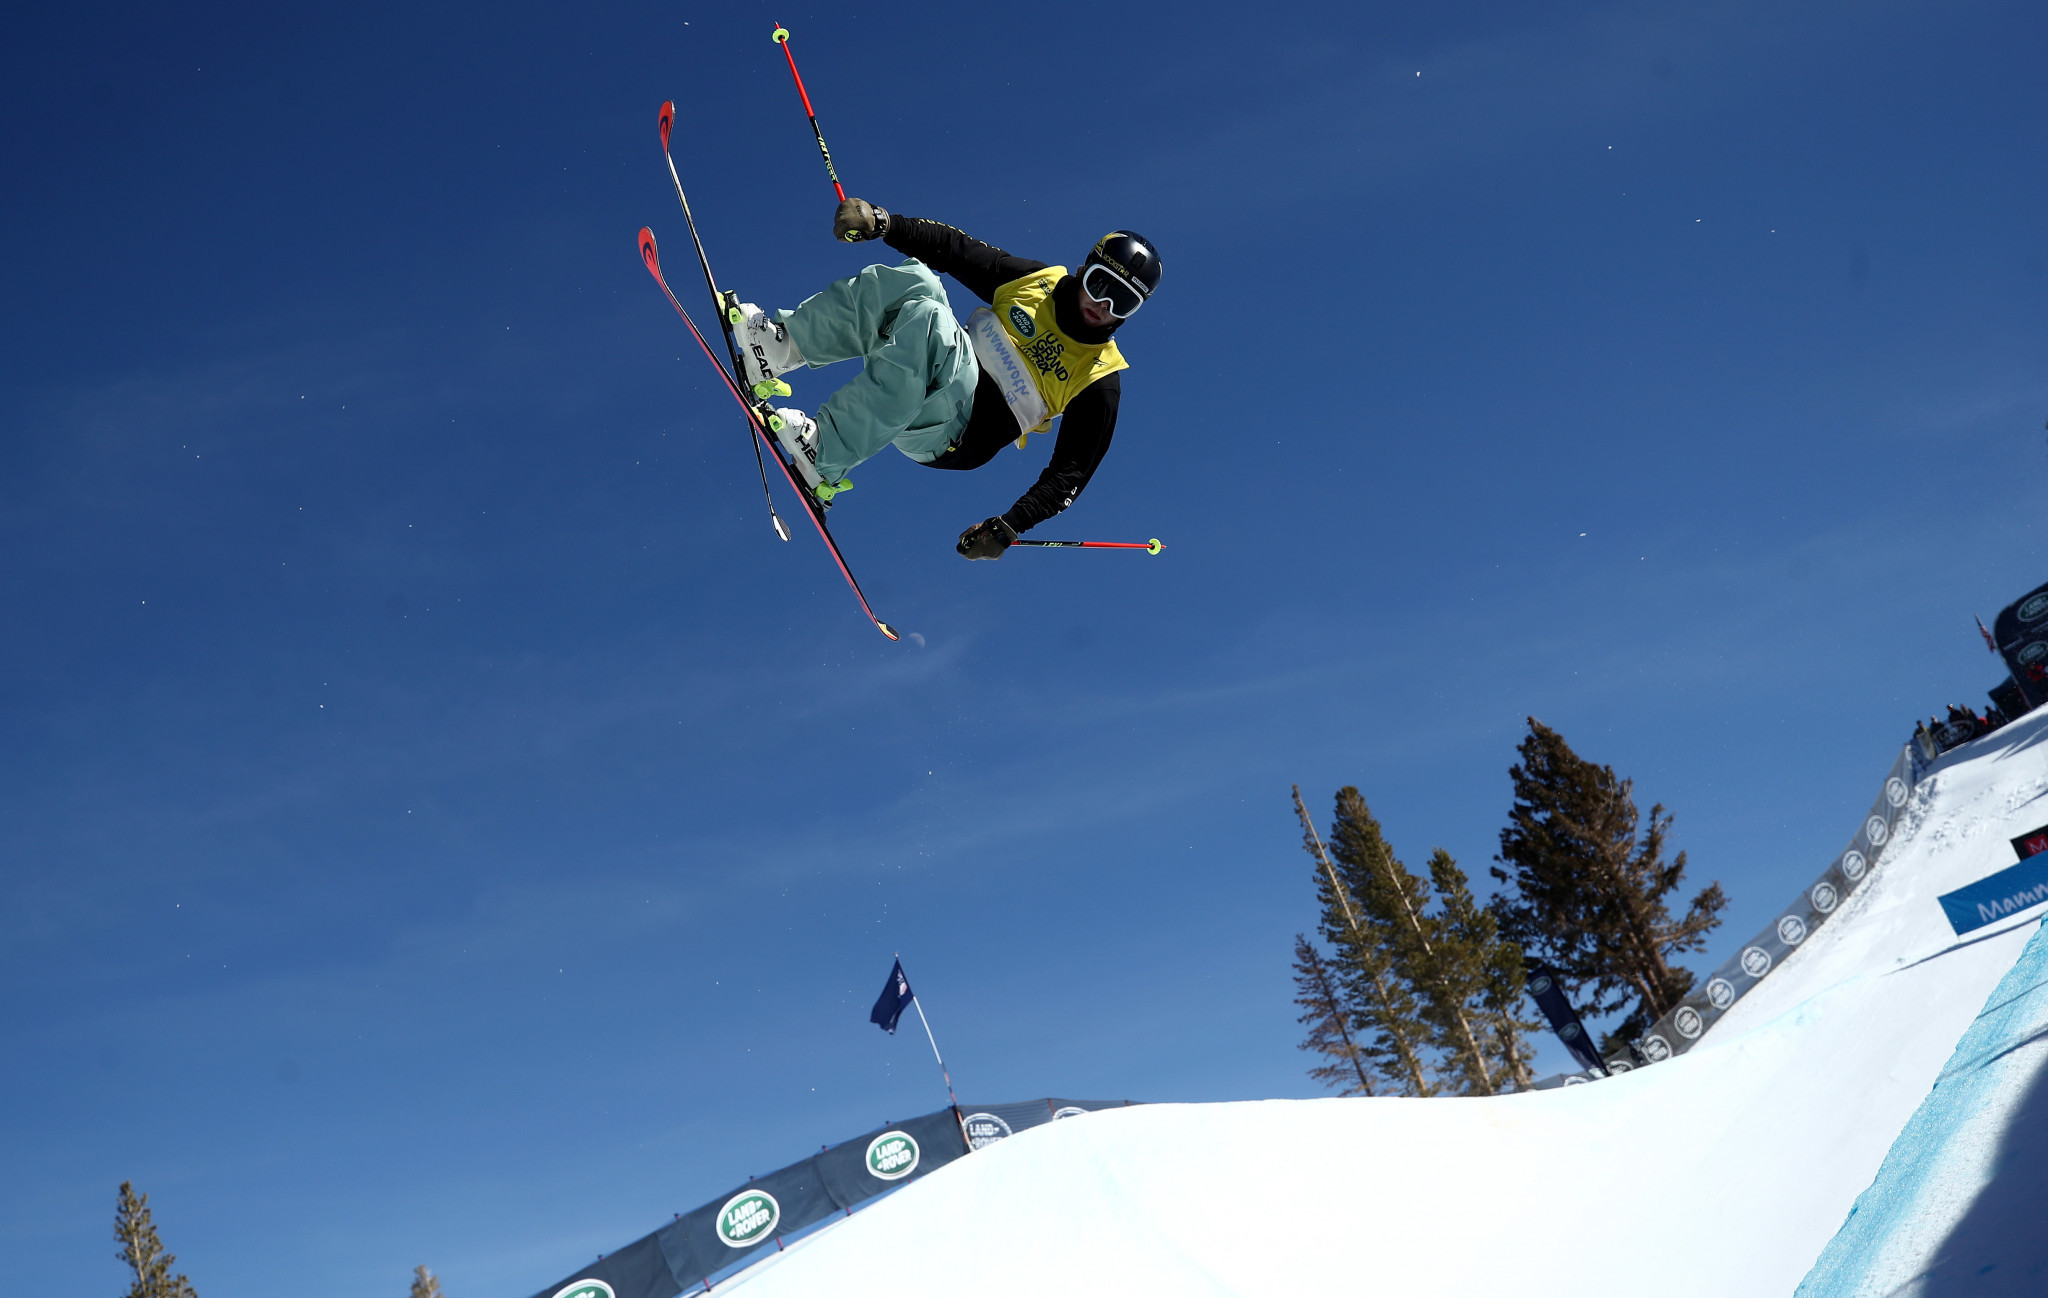 Blunck delivers sensational performance to win Halfpipe World Cup title in Mammoth Mountain